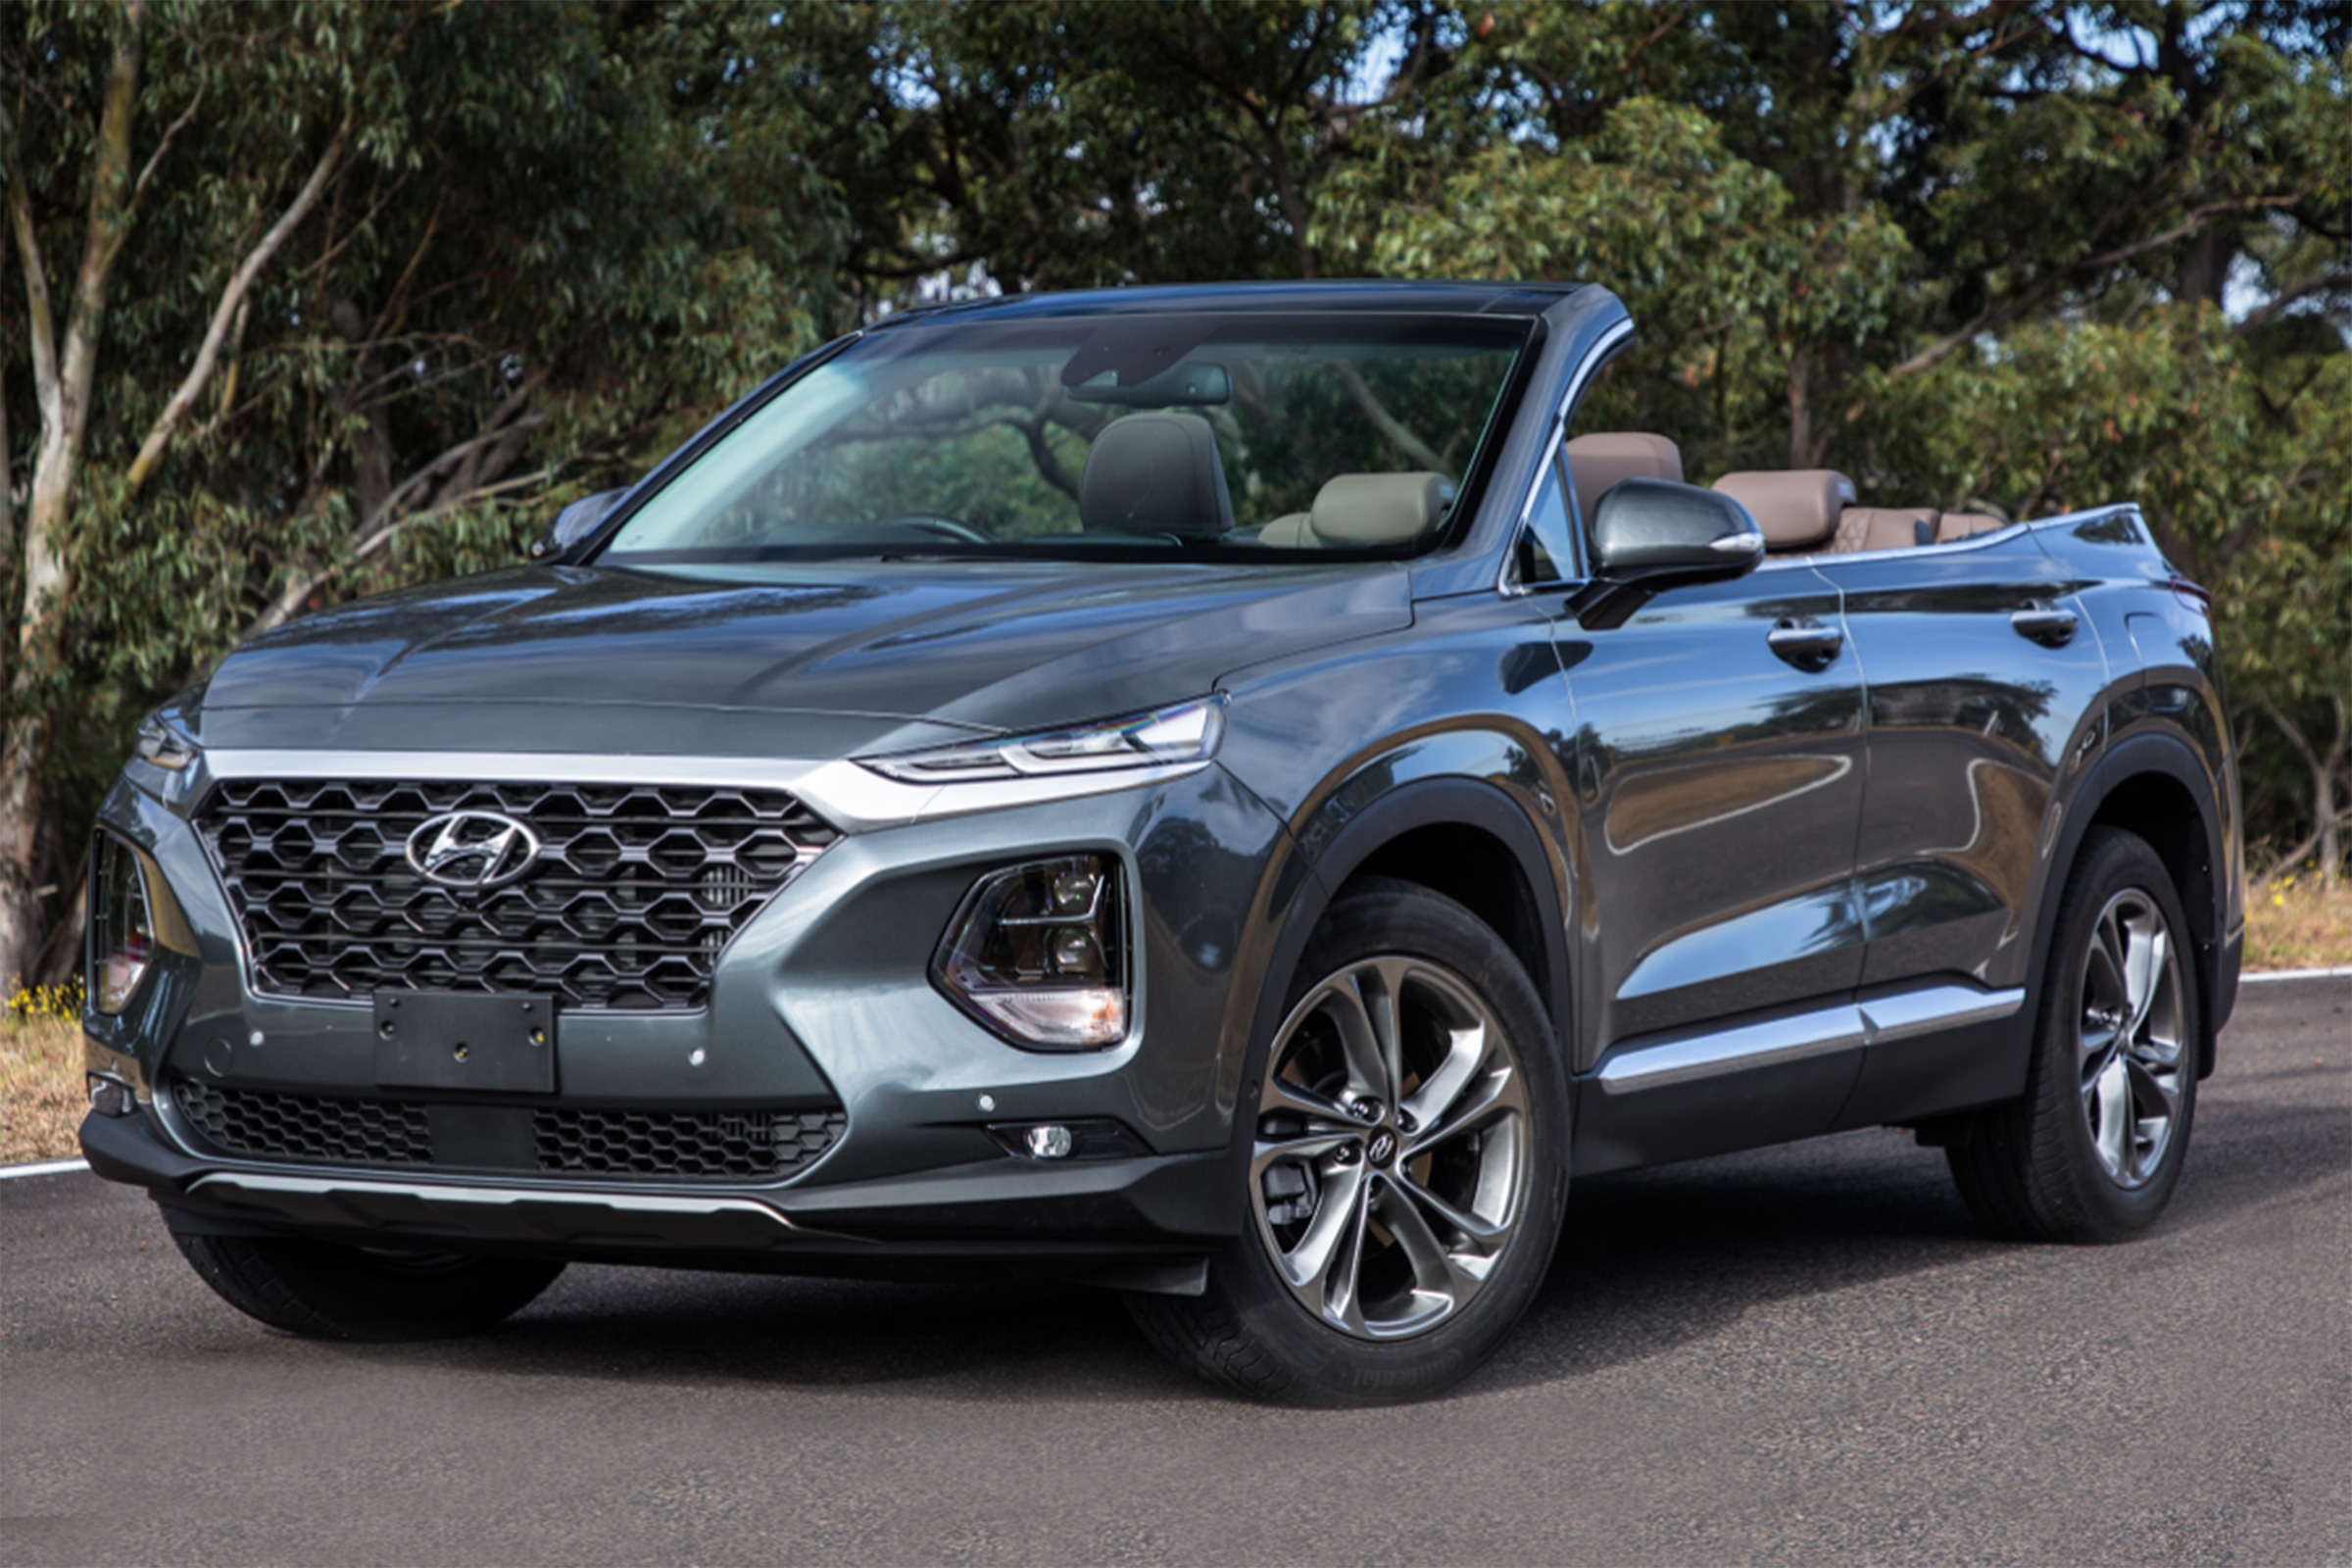 Oneoff Hyundai Santa Fe Cabriolet offers opentopped off